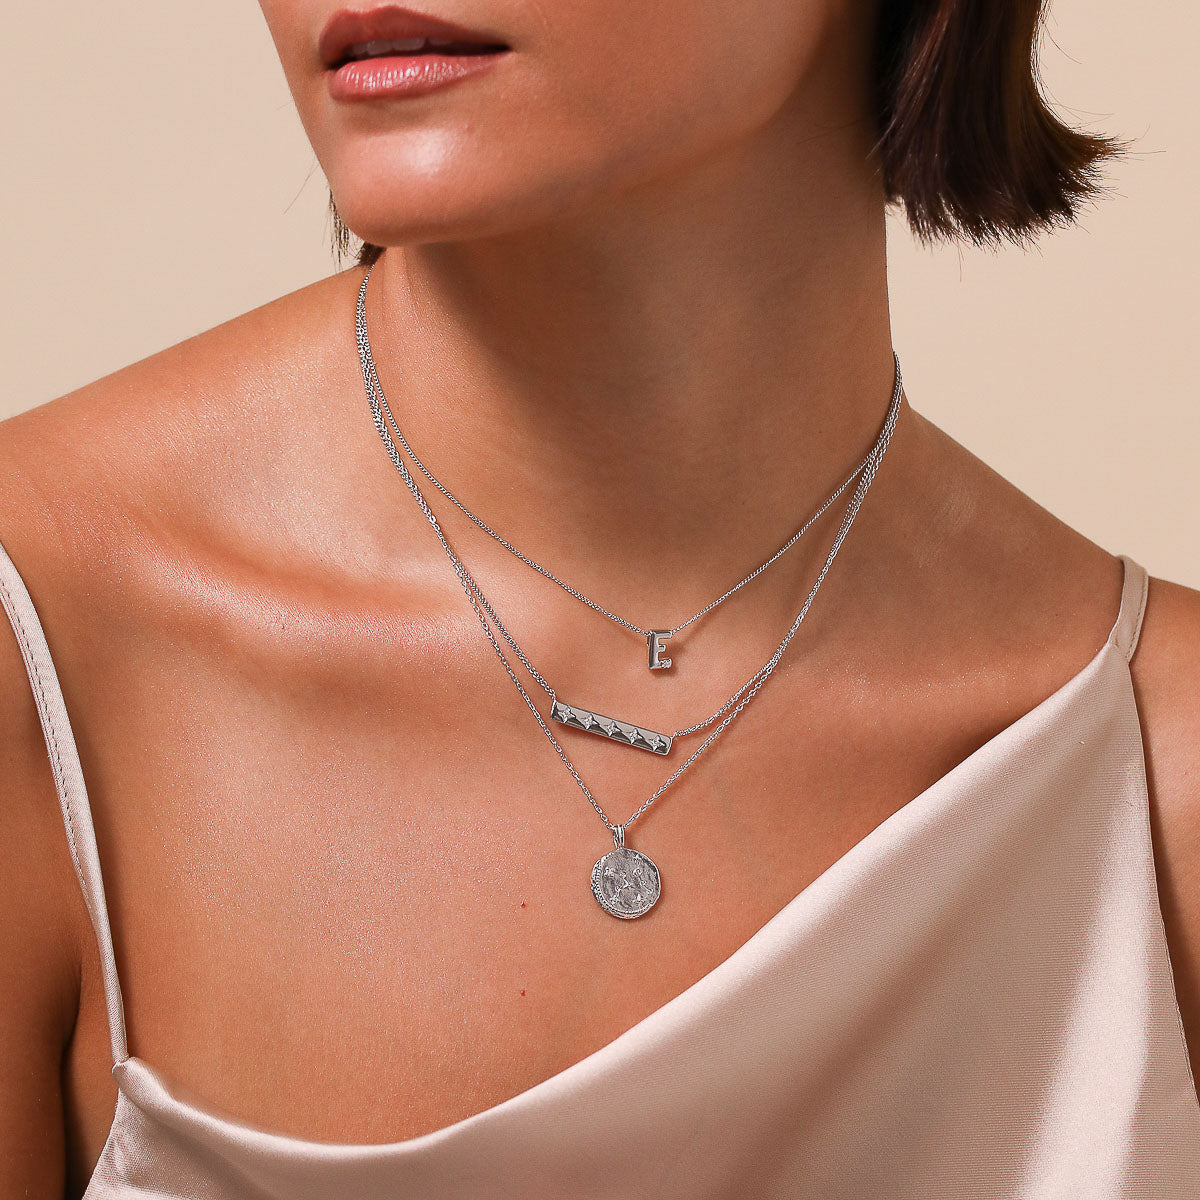 Virgo Zodiac Pendant Necklace in Silver worn layered with necklaces